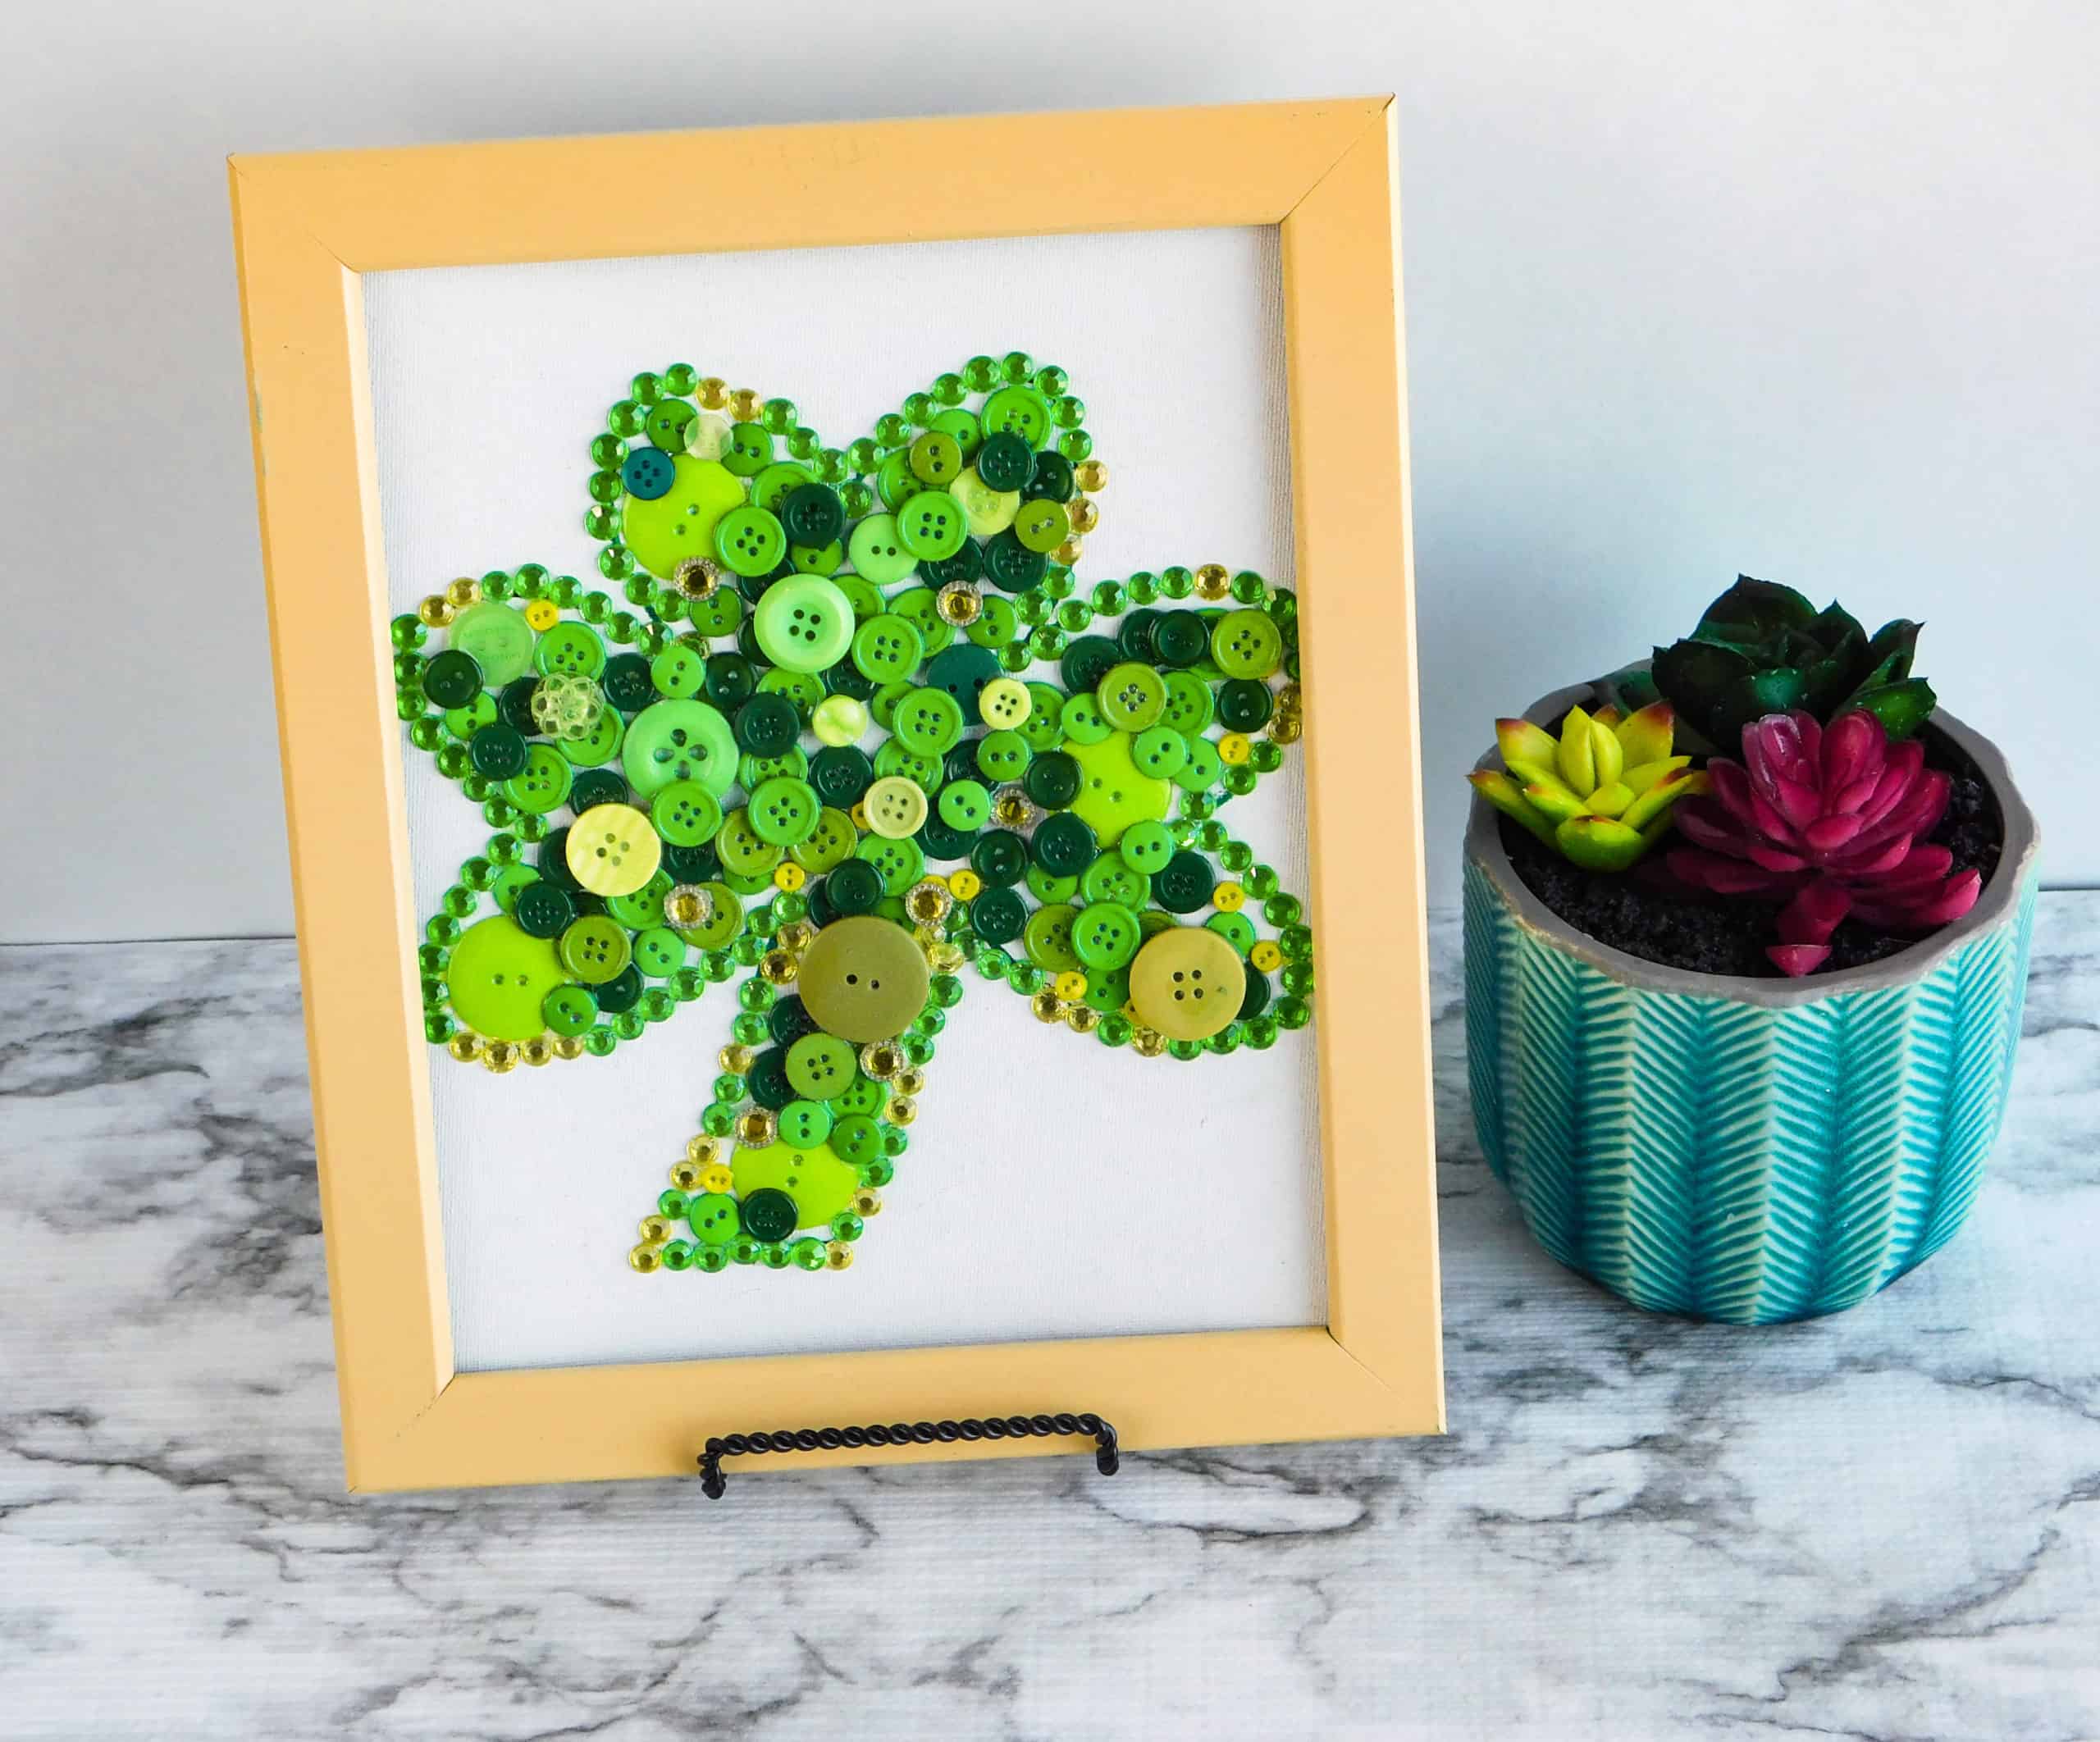 Simple Button Decoration Craft For St Patricks DayButton Craft For St Patricks Day